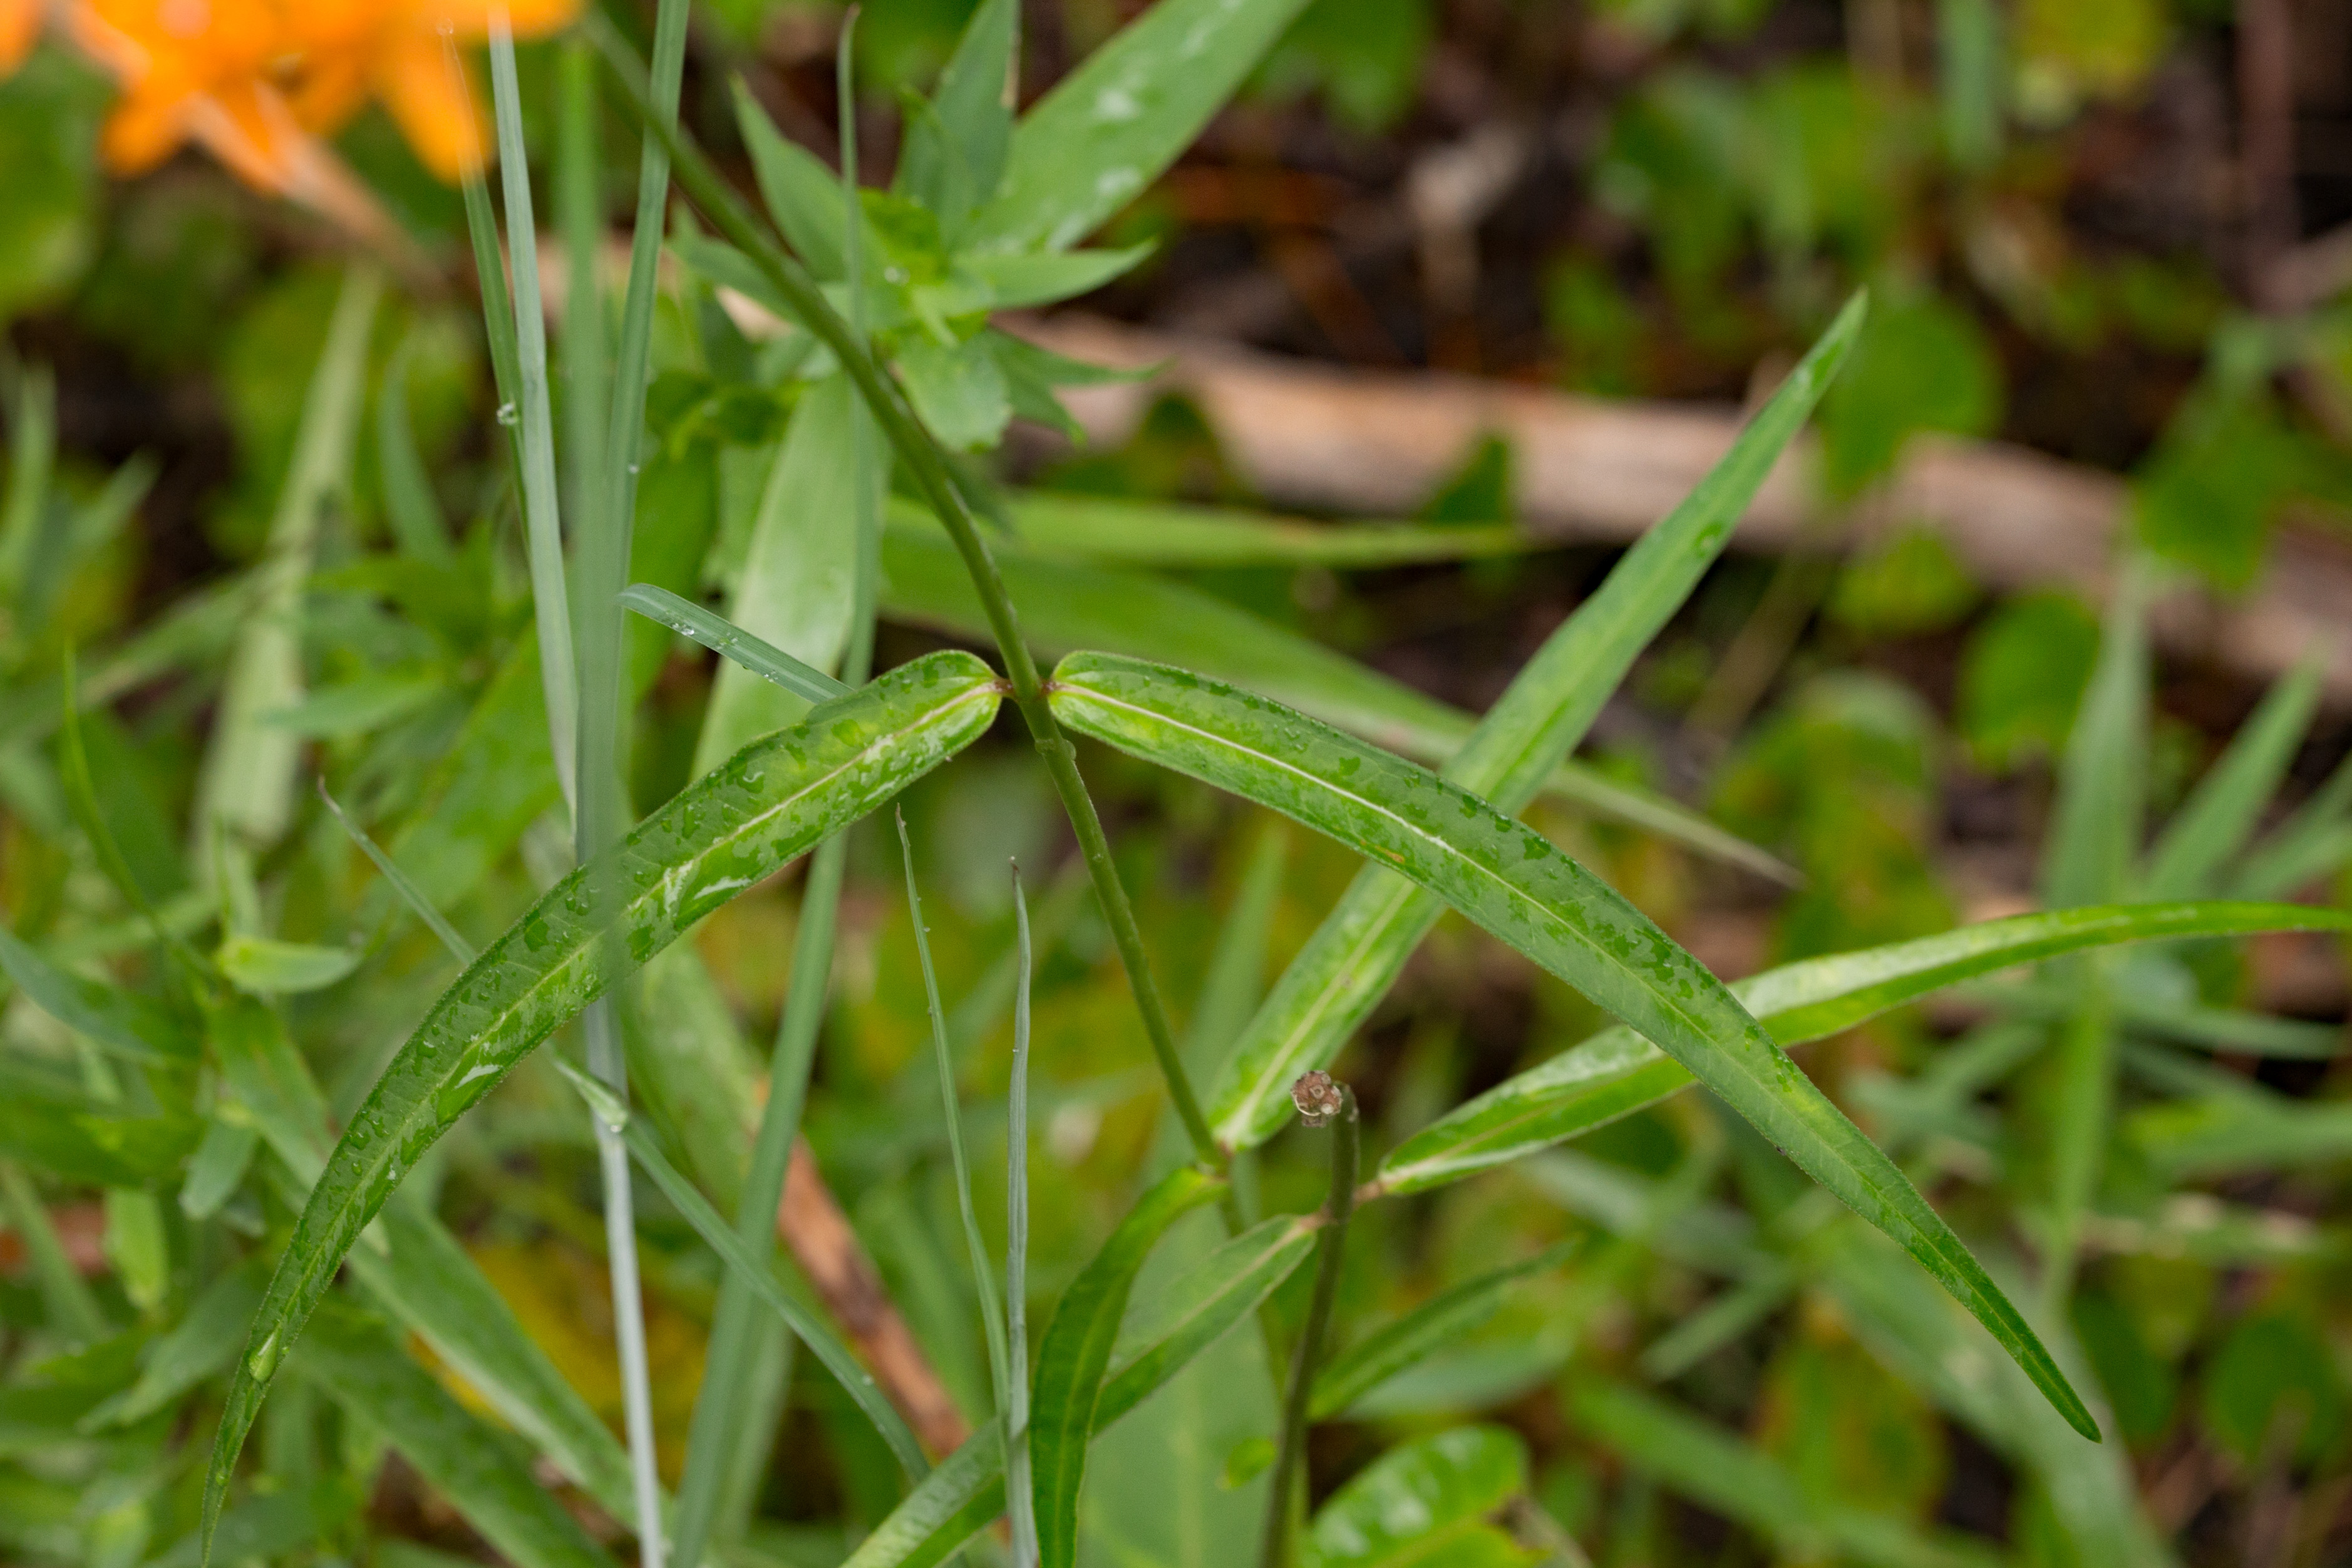 The Scientific Name is Asclepias lanceolata. You will likely hear them called Few-flower Milkweed. This picture shows the The simple, slender, lanceolate stem leaves of Few-flowered Milkweed. of Asclepias lanceolata